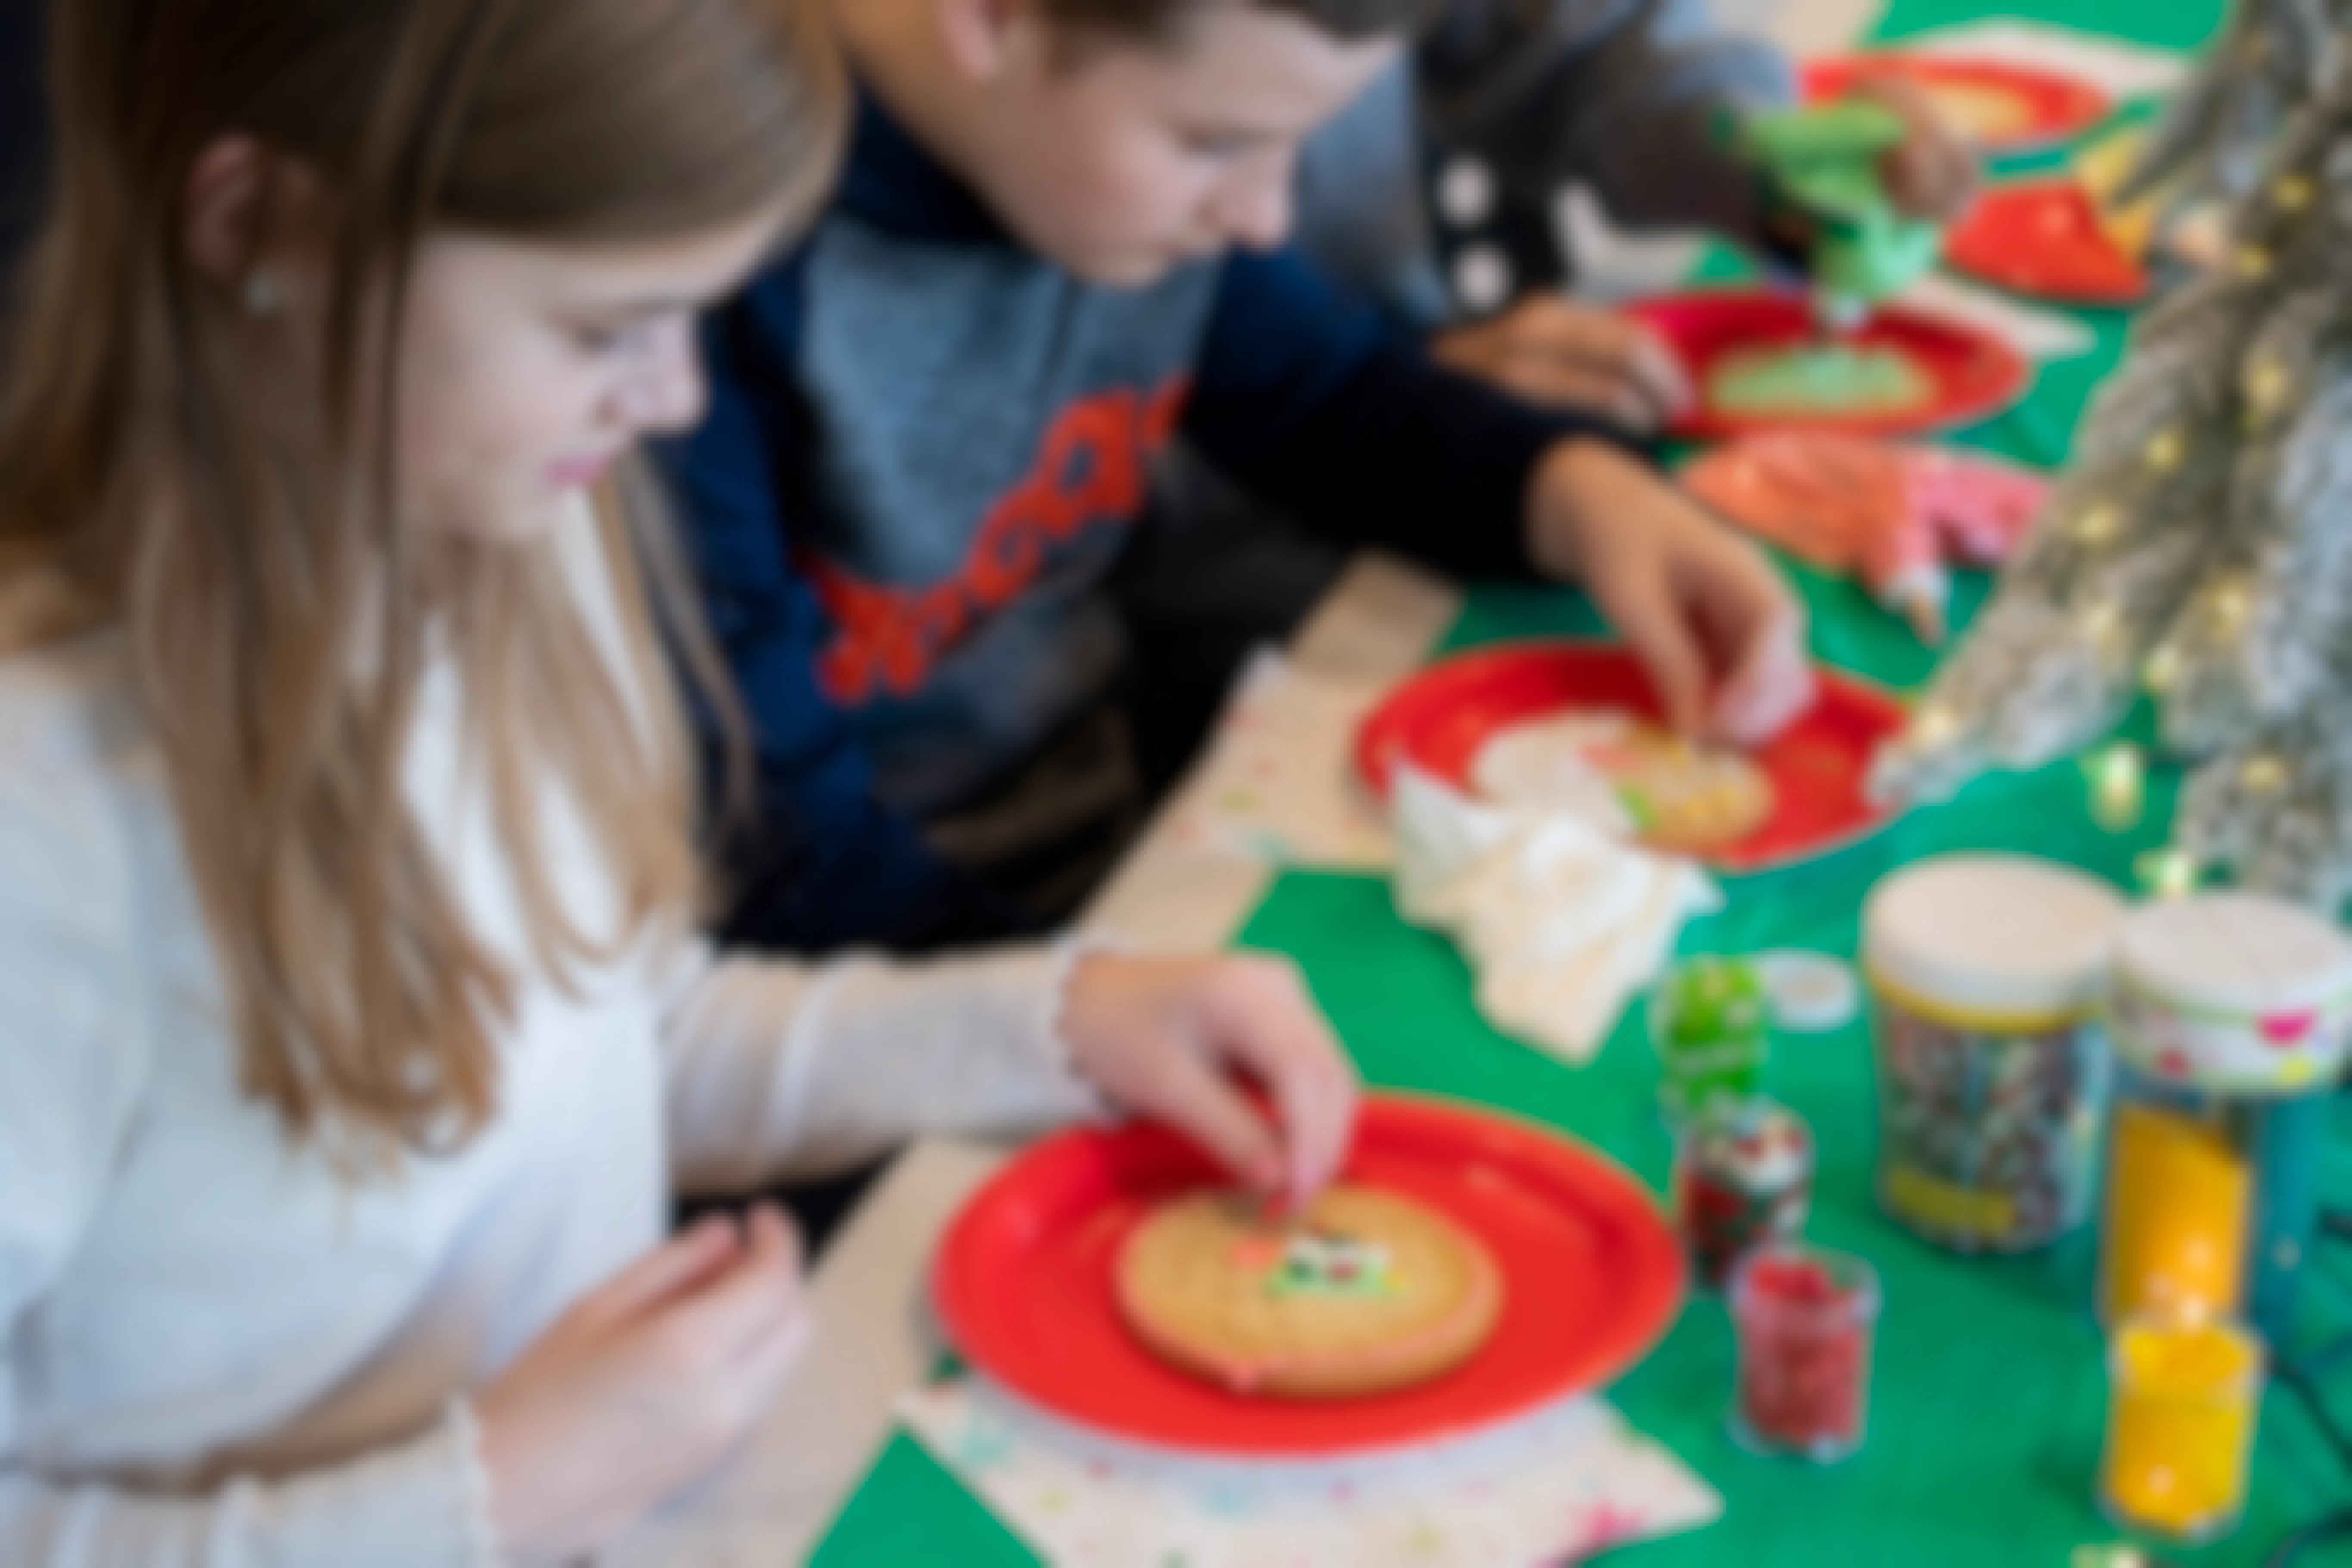 Some kids decorating Christmas Cookies at a table